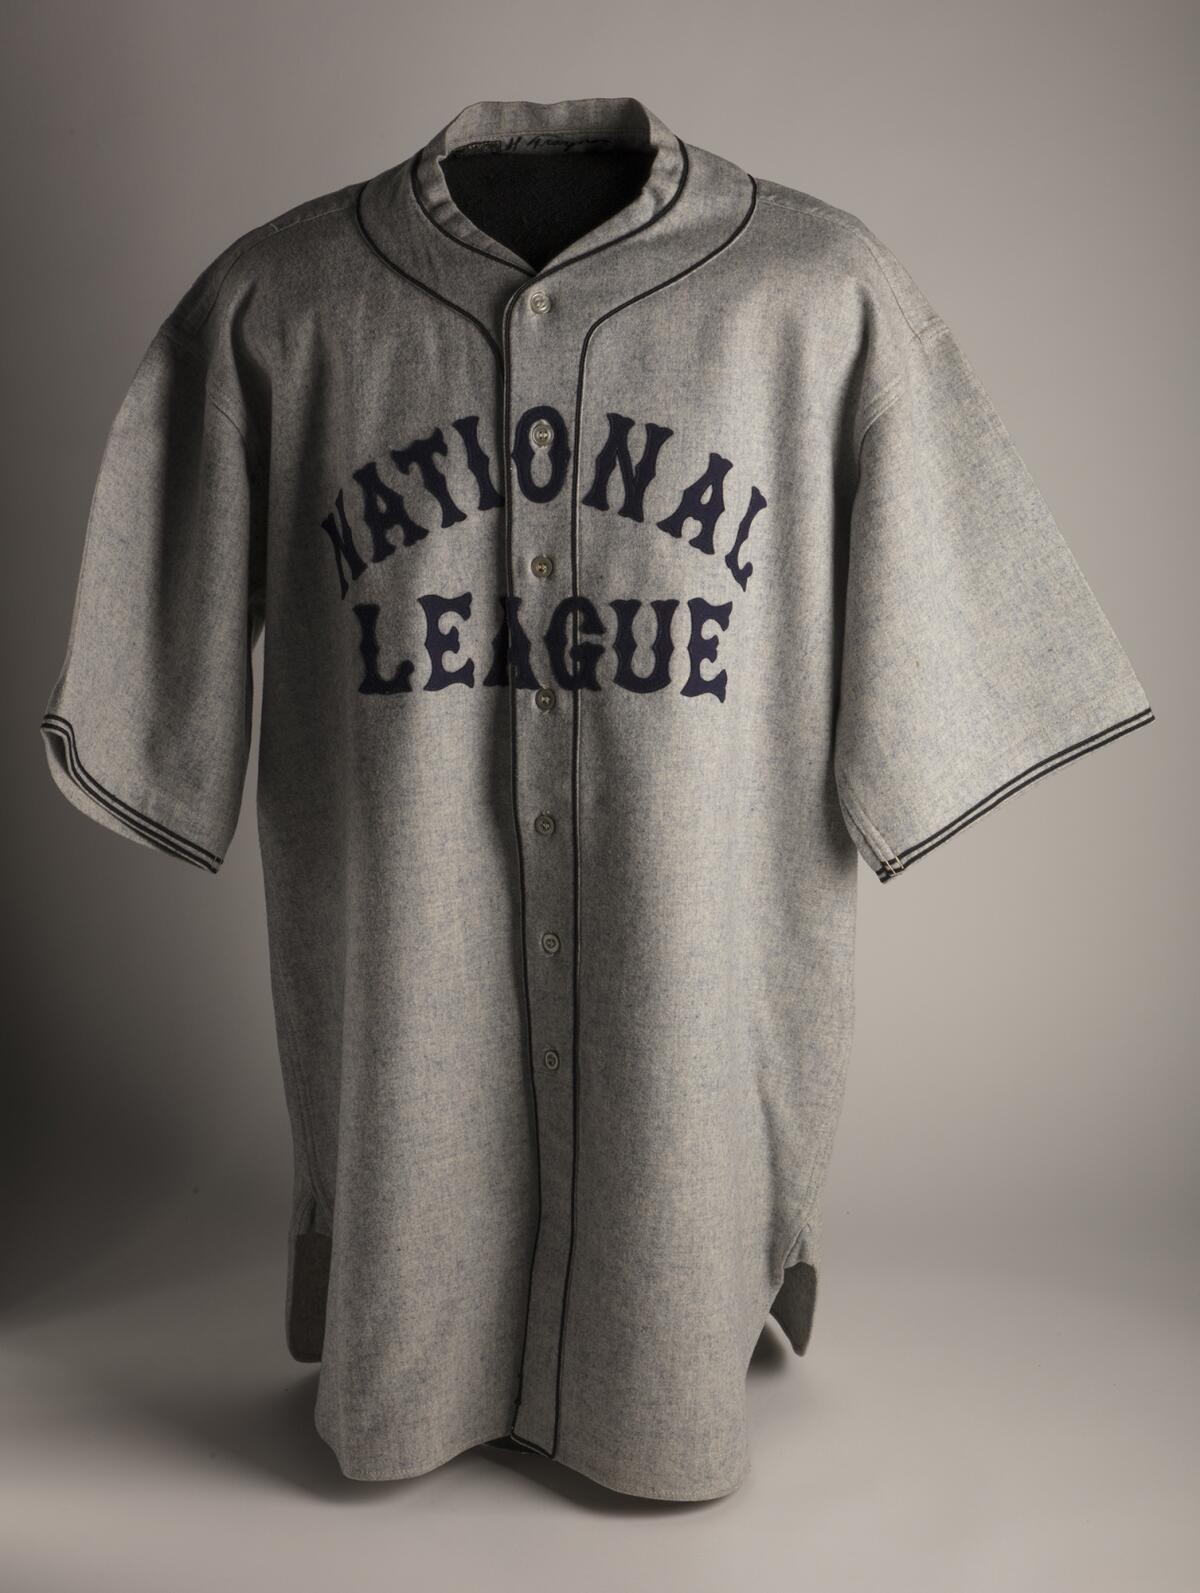 Players for the National League wore this jersey in the inaugural All-Star game in 1933.